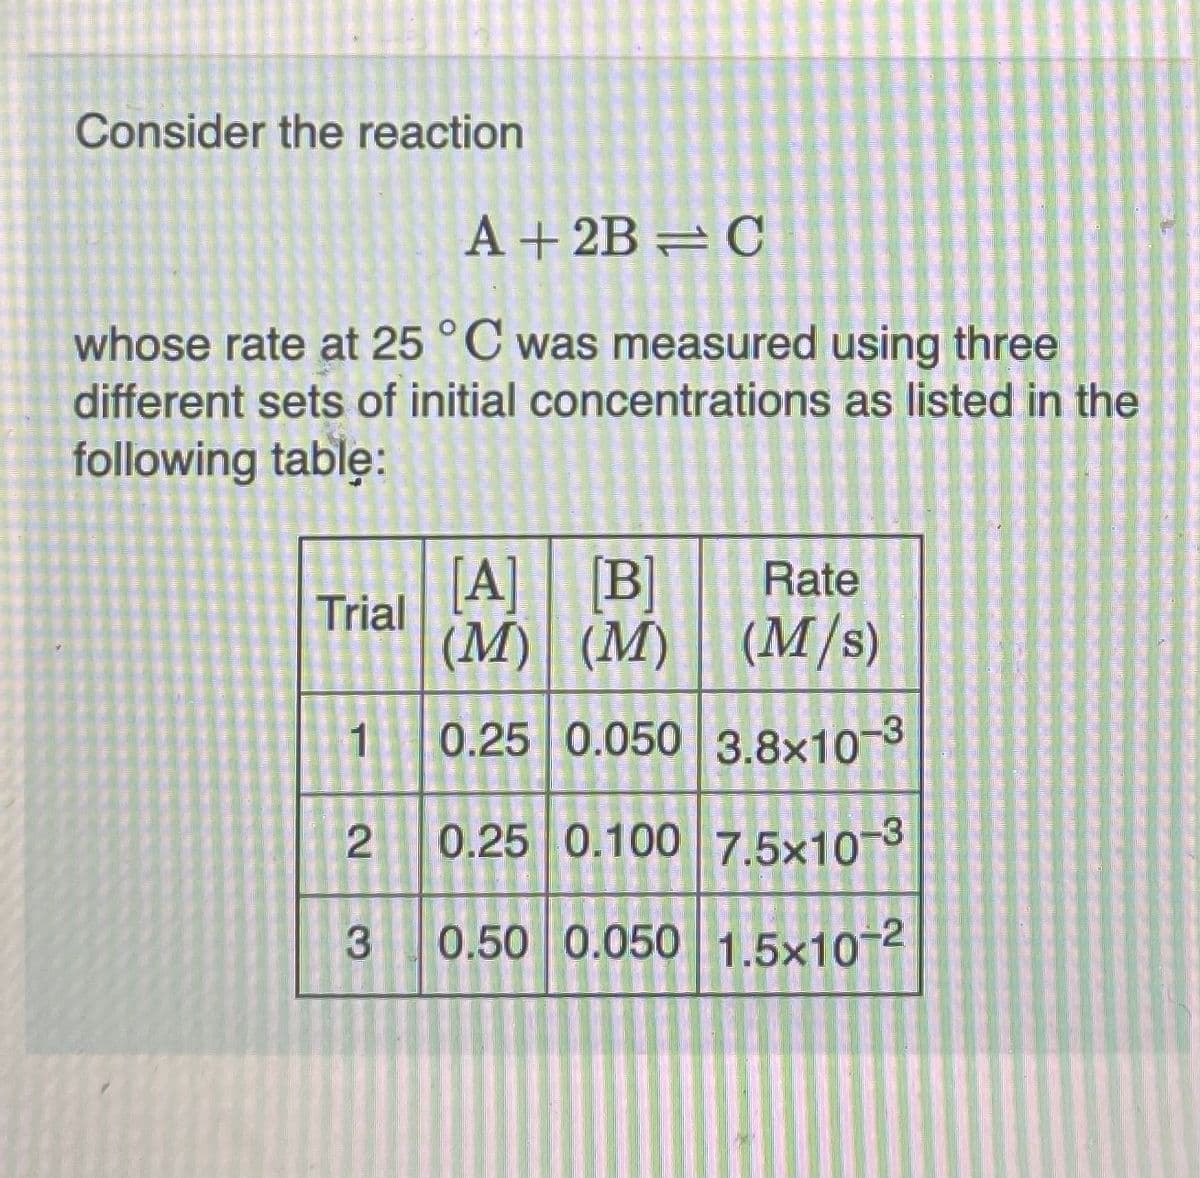 Consider the reaction
A + 2B = C
whose rate at 25 °C was measured using three
different sets of initial concentrations as listed in the
following tablę:
[A] [B]
Rate
Trial
(M) (M) | (М/s)
0.25 0.050 3.8×10¬3
0.25 0.100 7.5x10-8
3
0.50 0.050 1.5x102
